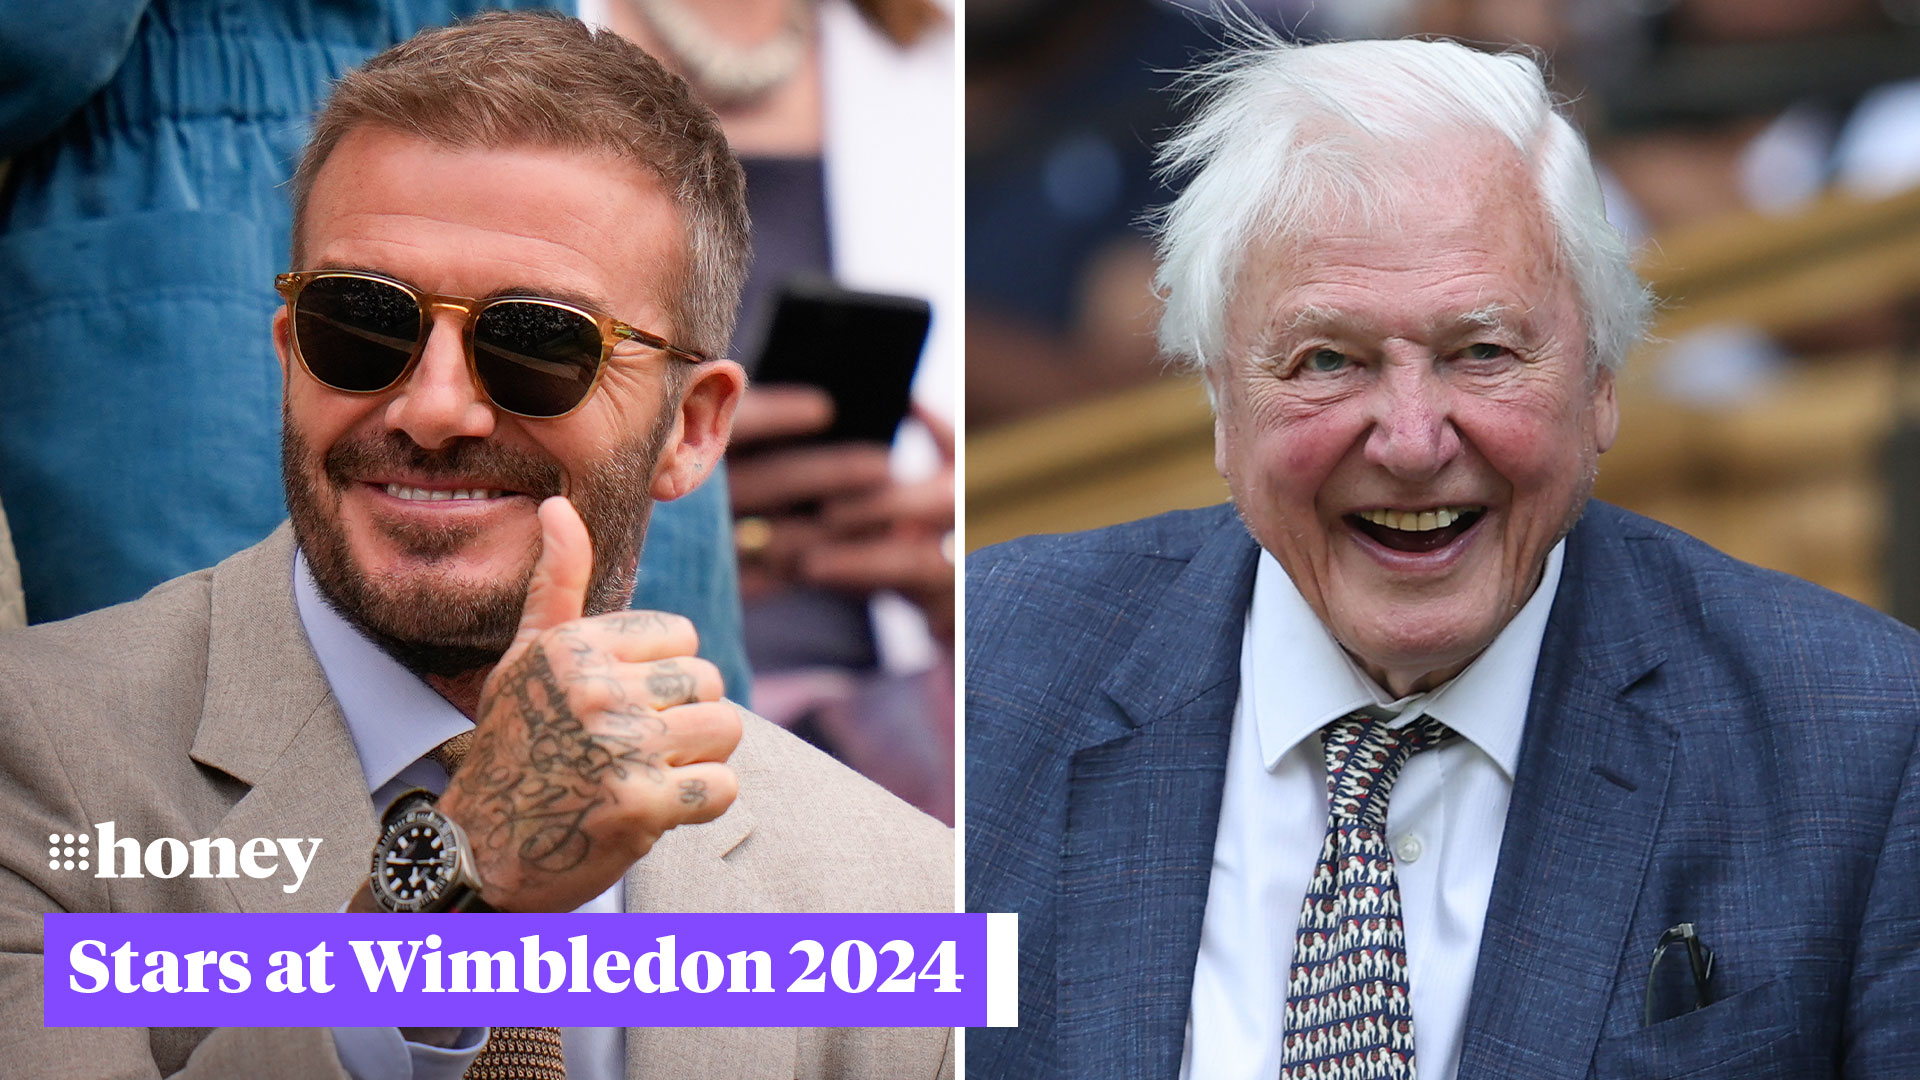 Stars out in full force at Wimbledon 2024